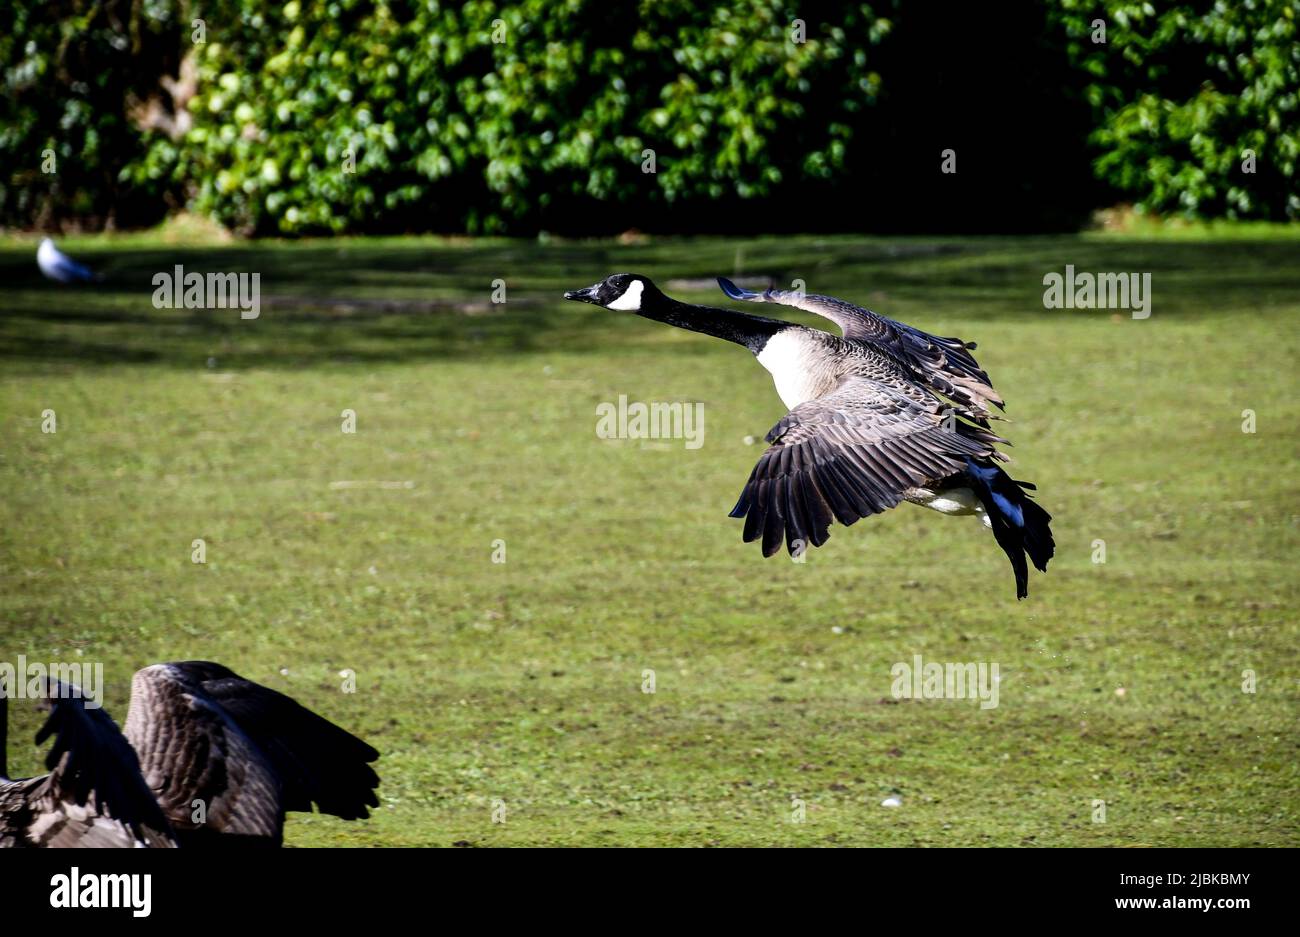 Canadian Goose, Geese, Branta canadensis, Canada Goose taking off Stock Photo